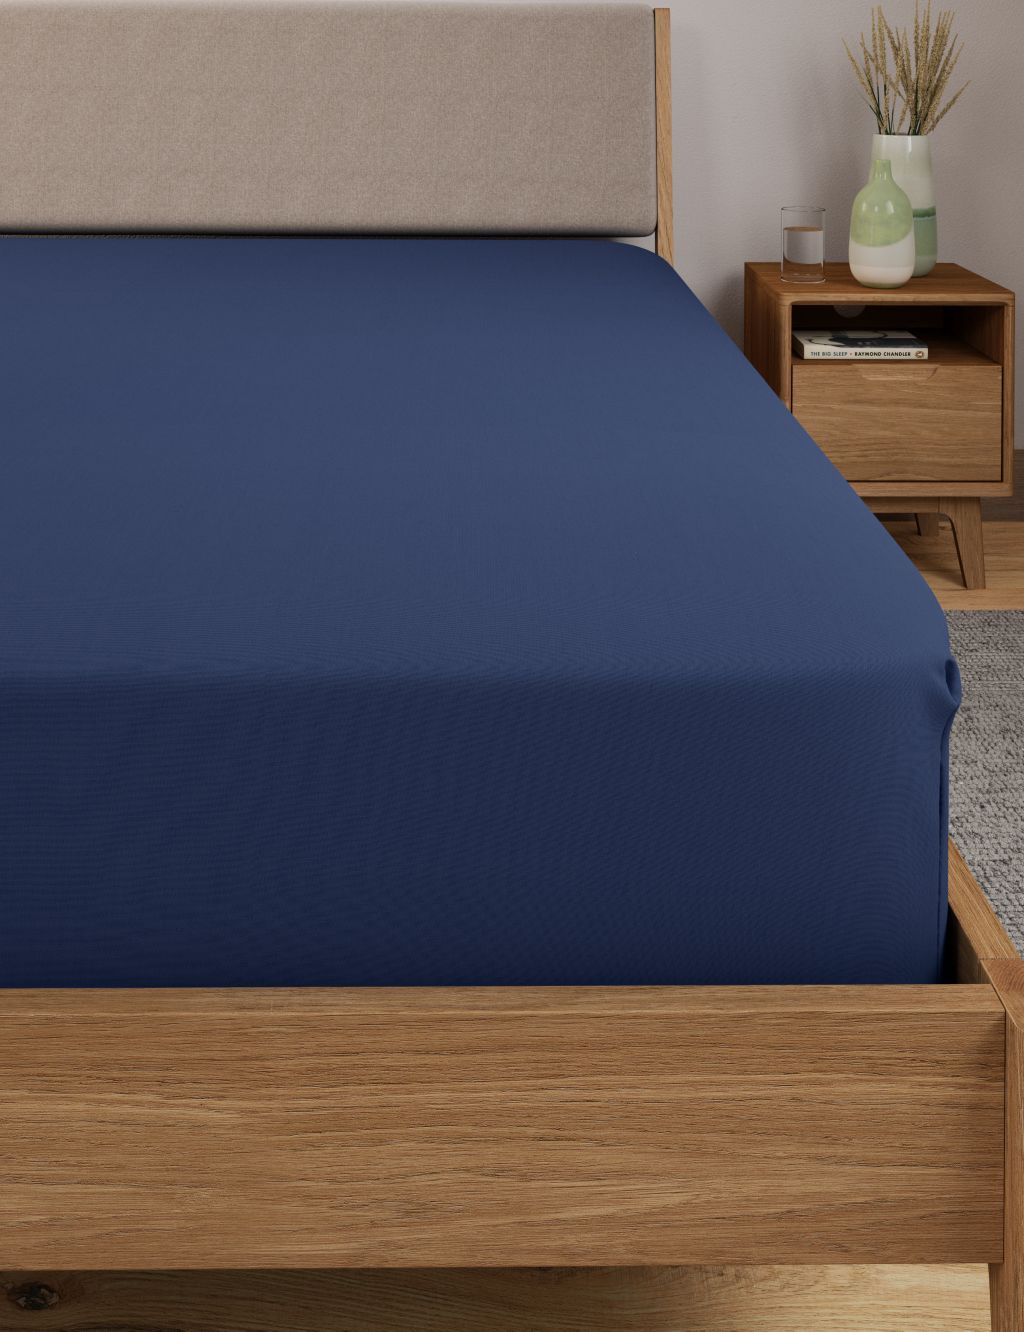 Comfortably Cool Lyocell Rich Extra Deep Fitted Sheet image 2